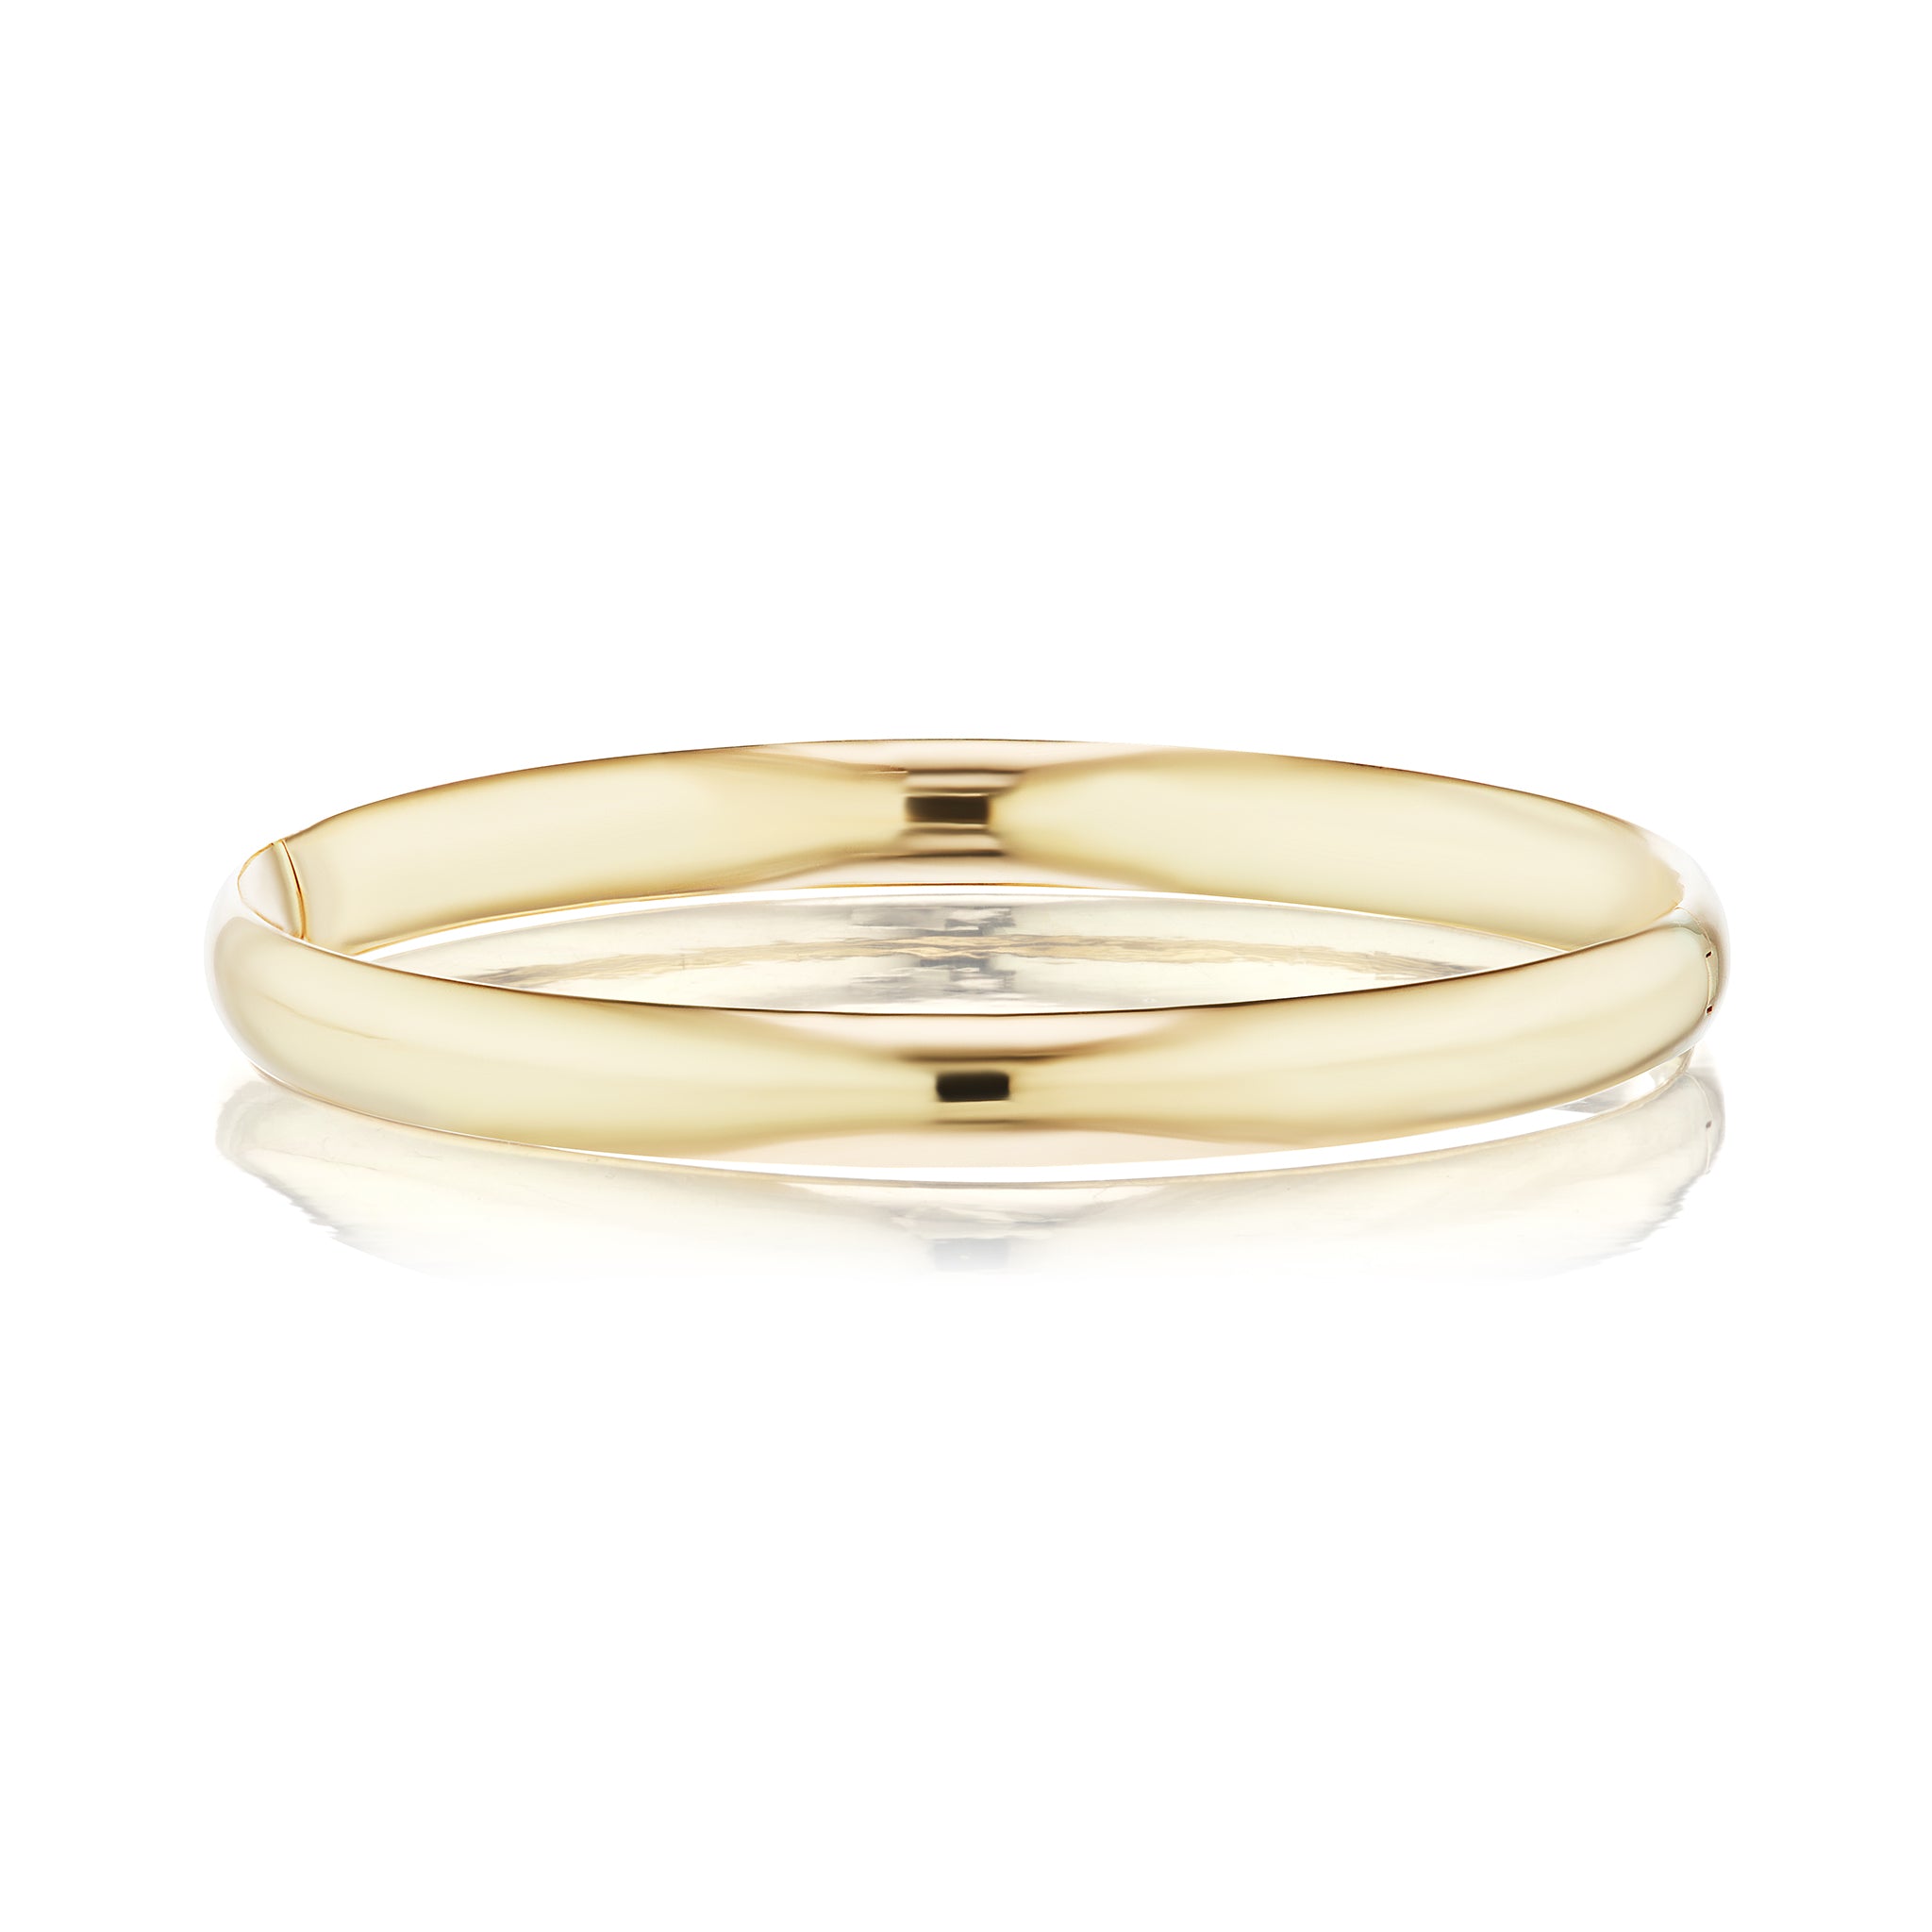 The Gold Hollow Hinged Bangle